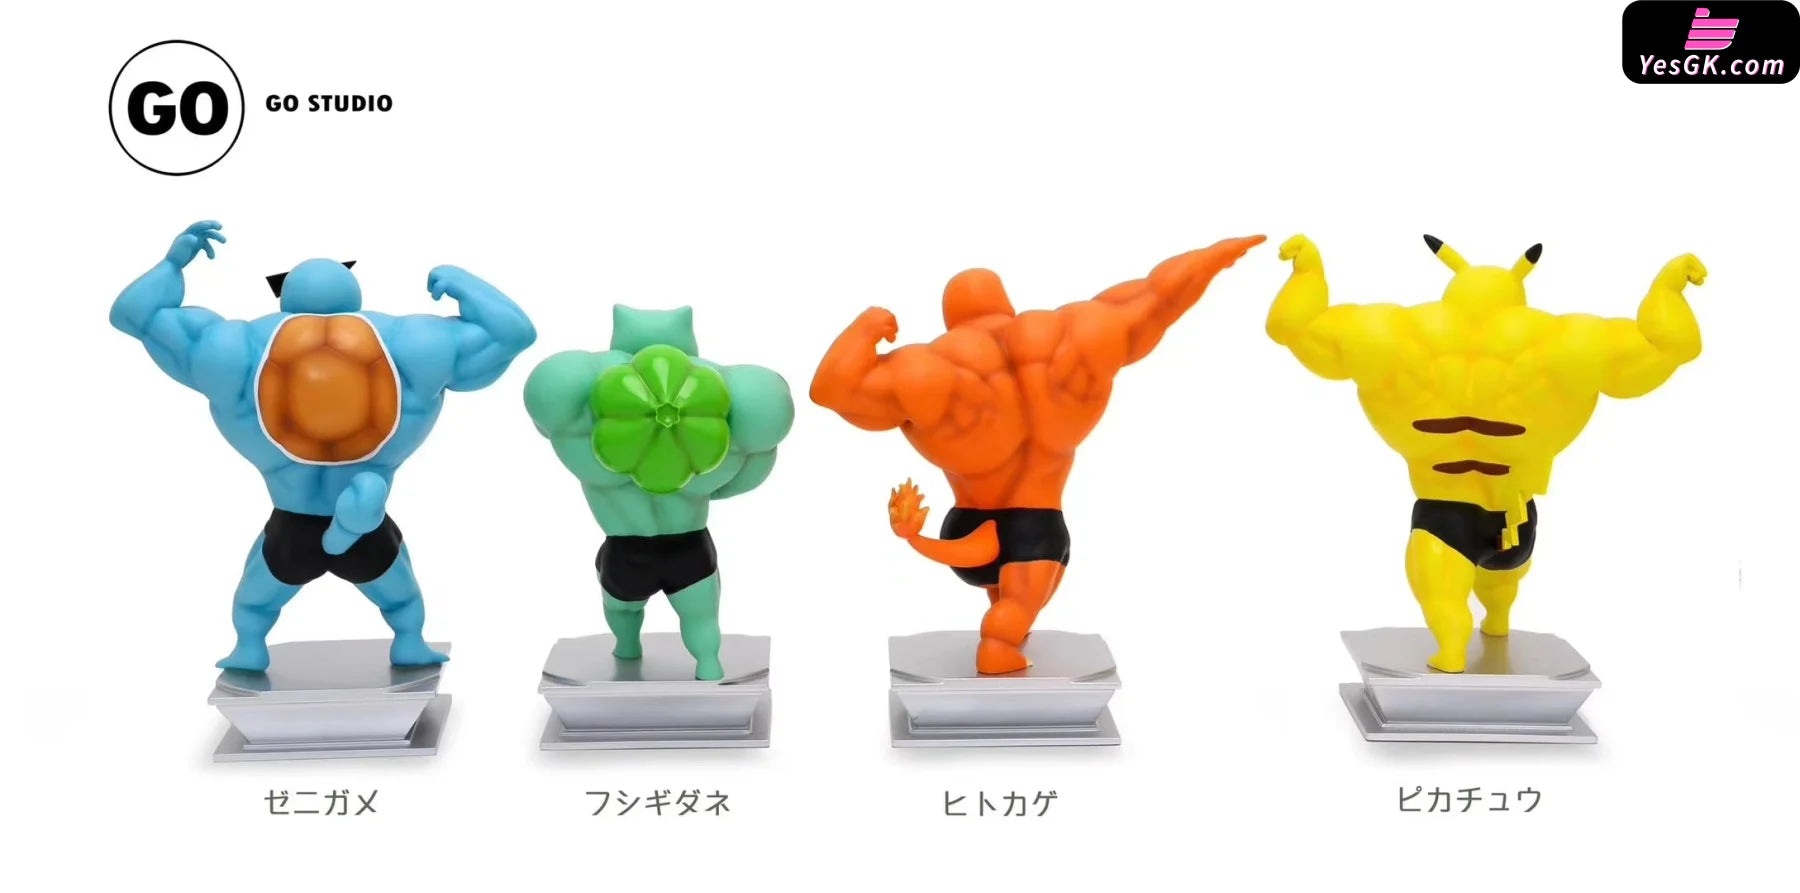 Pokemon - Muscle Show Series Pikachu Charmander Squirtle & Bulbasaur Resin Statue Go Studio [In